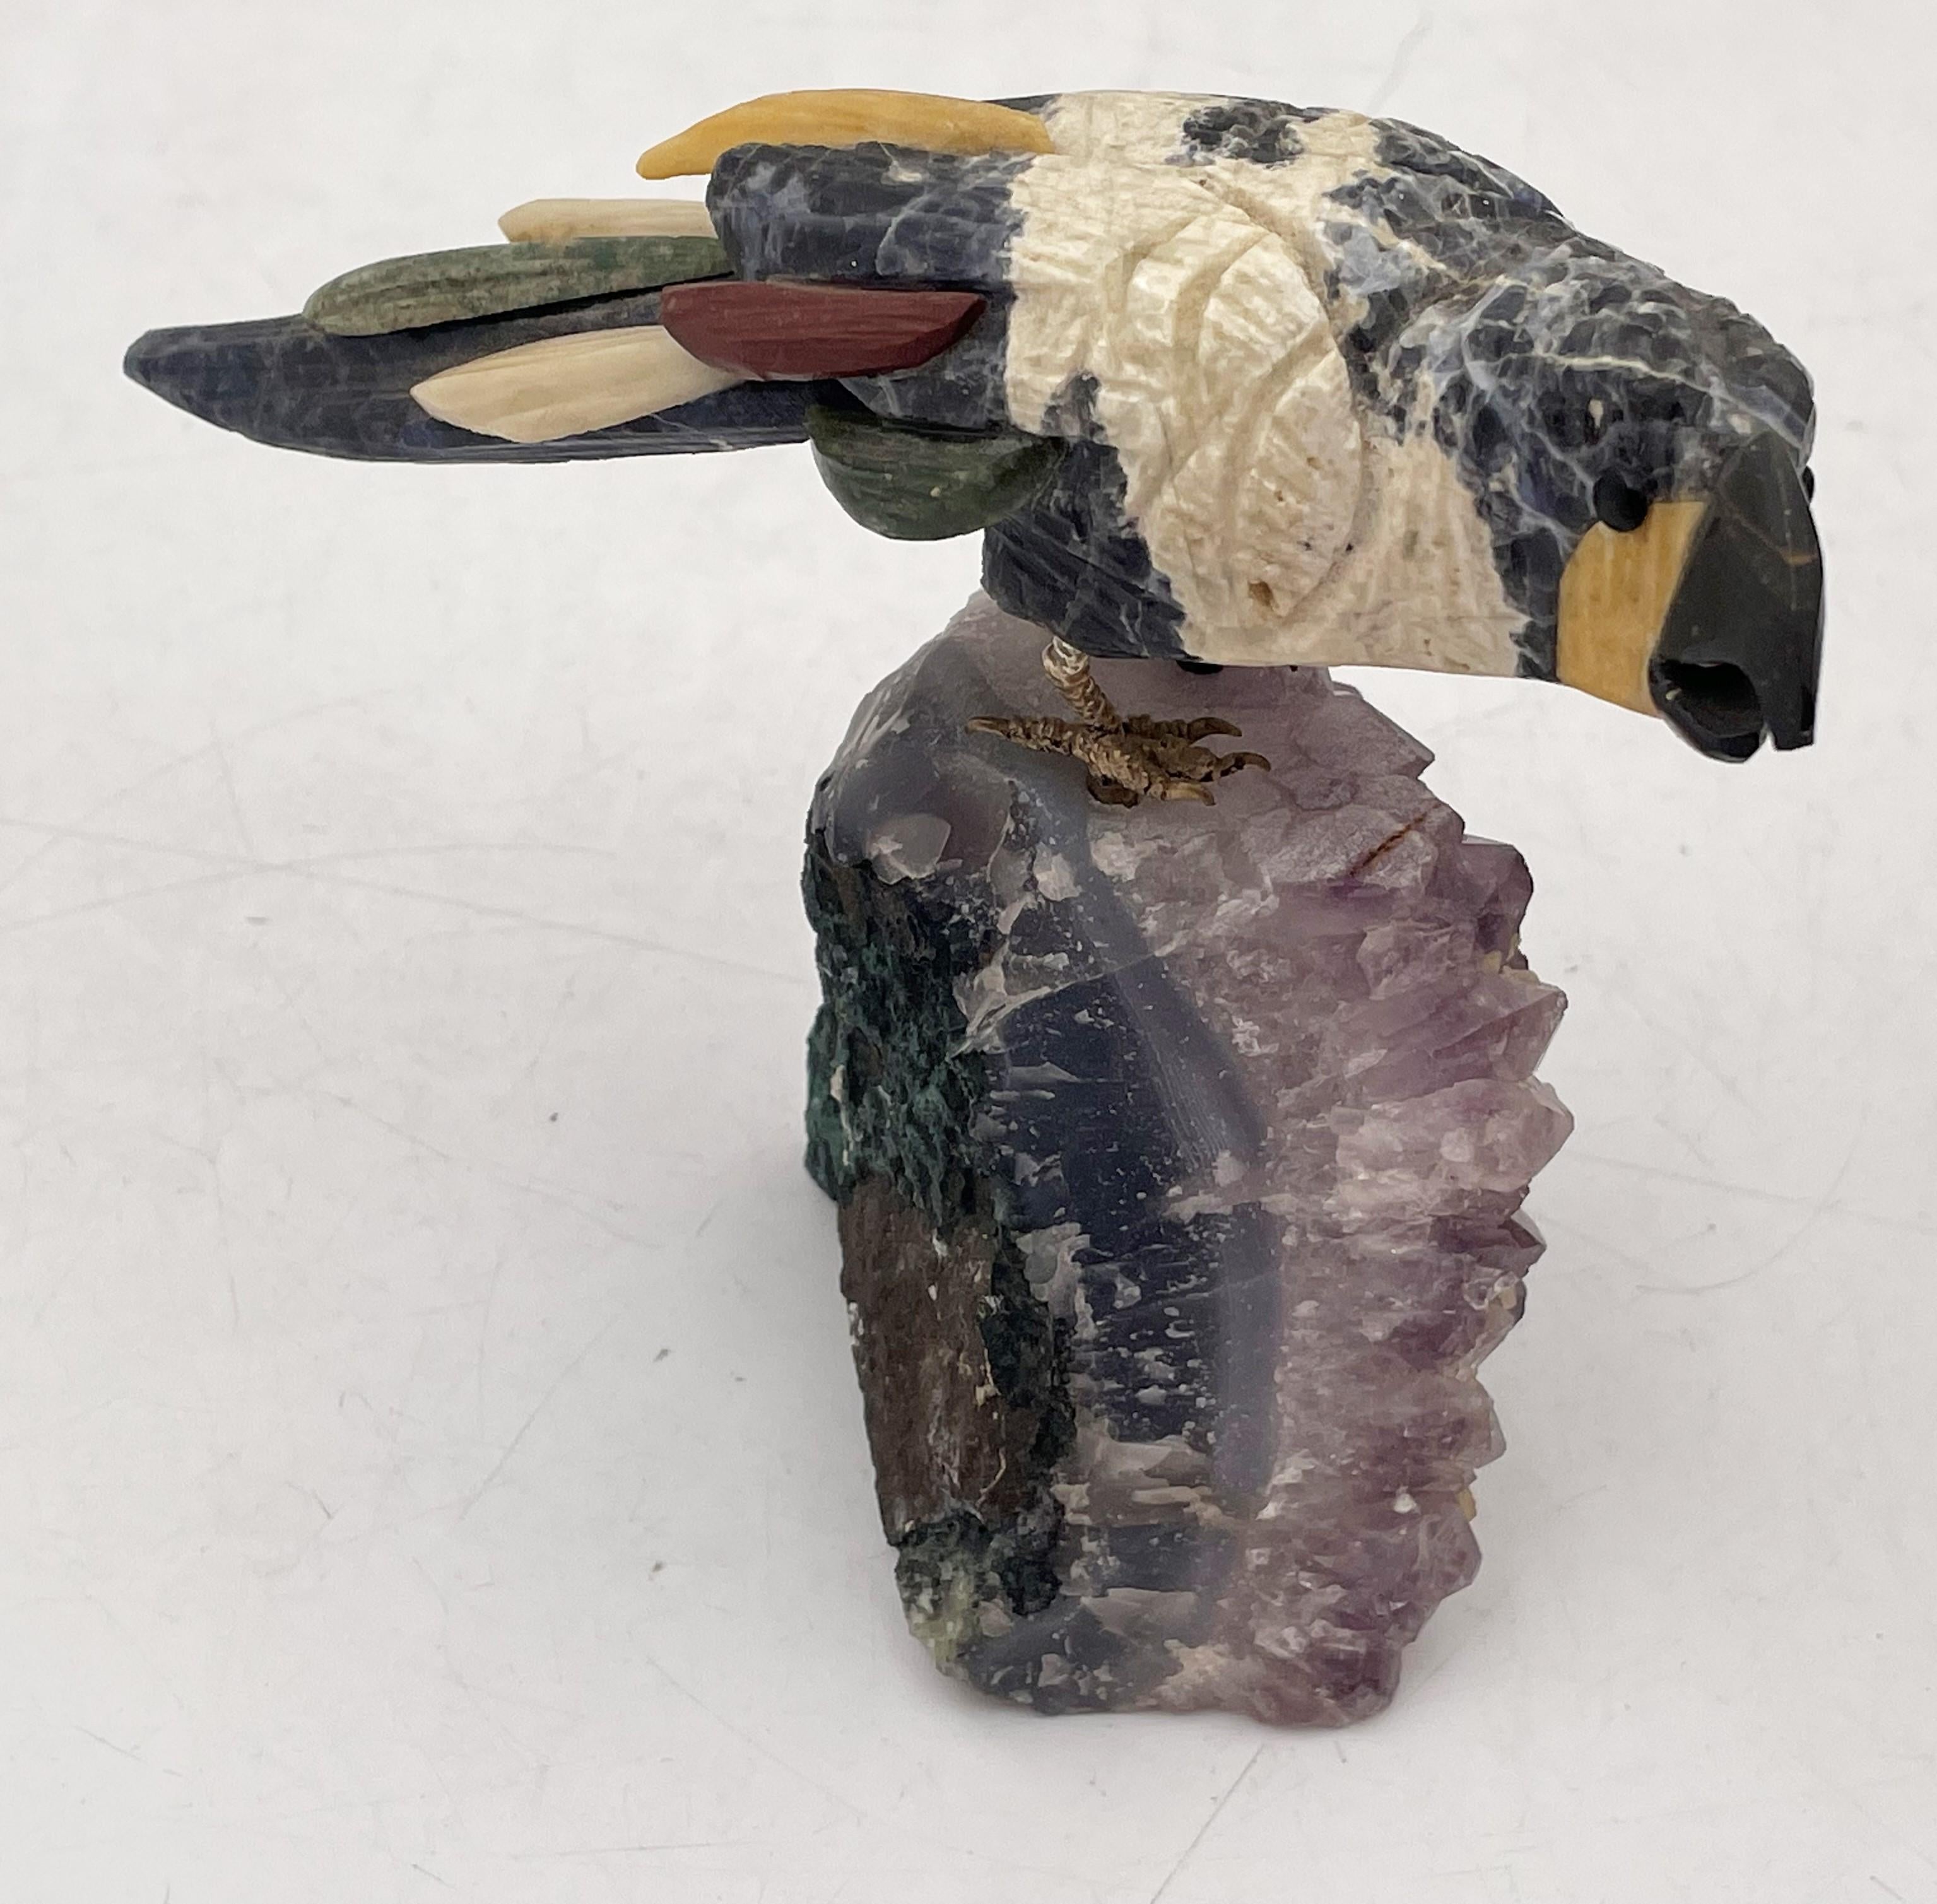 Highly realistic and detailed sculpture of a multi-colored bird with gilt silver legs perched on an amethyst base. This beautiful piece measures 3 3/4'' in height by 5 3/8'' in depth by 2 1/2'' in width.

 